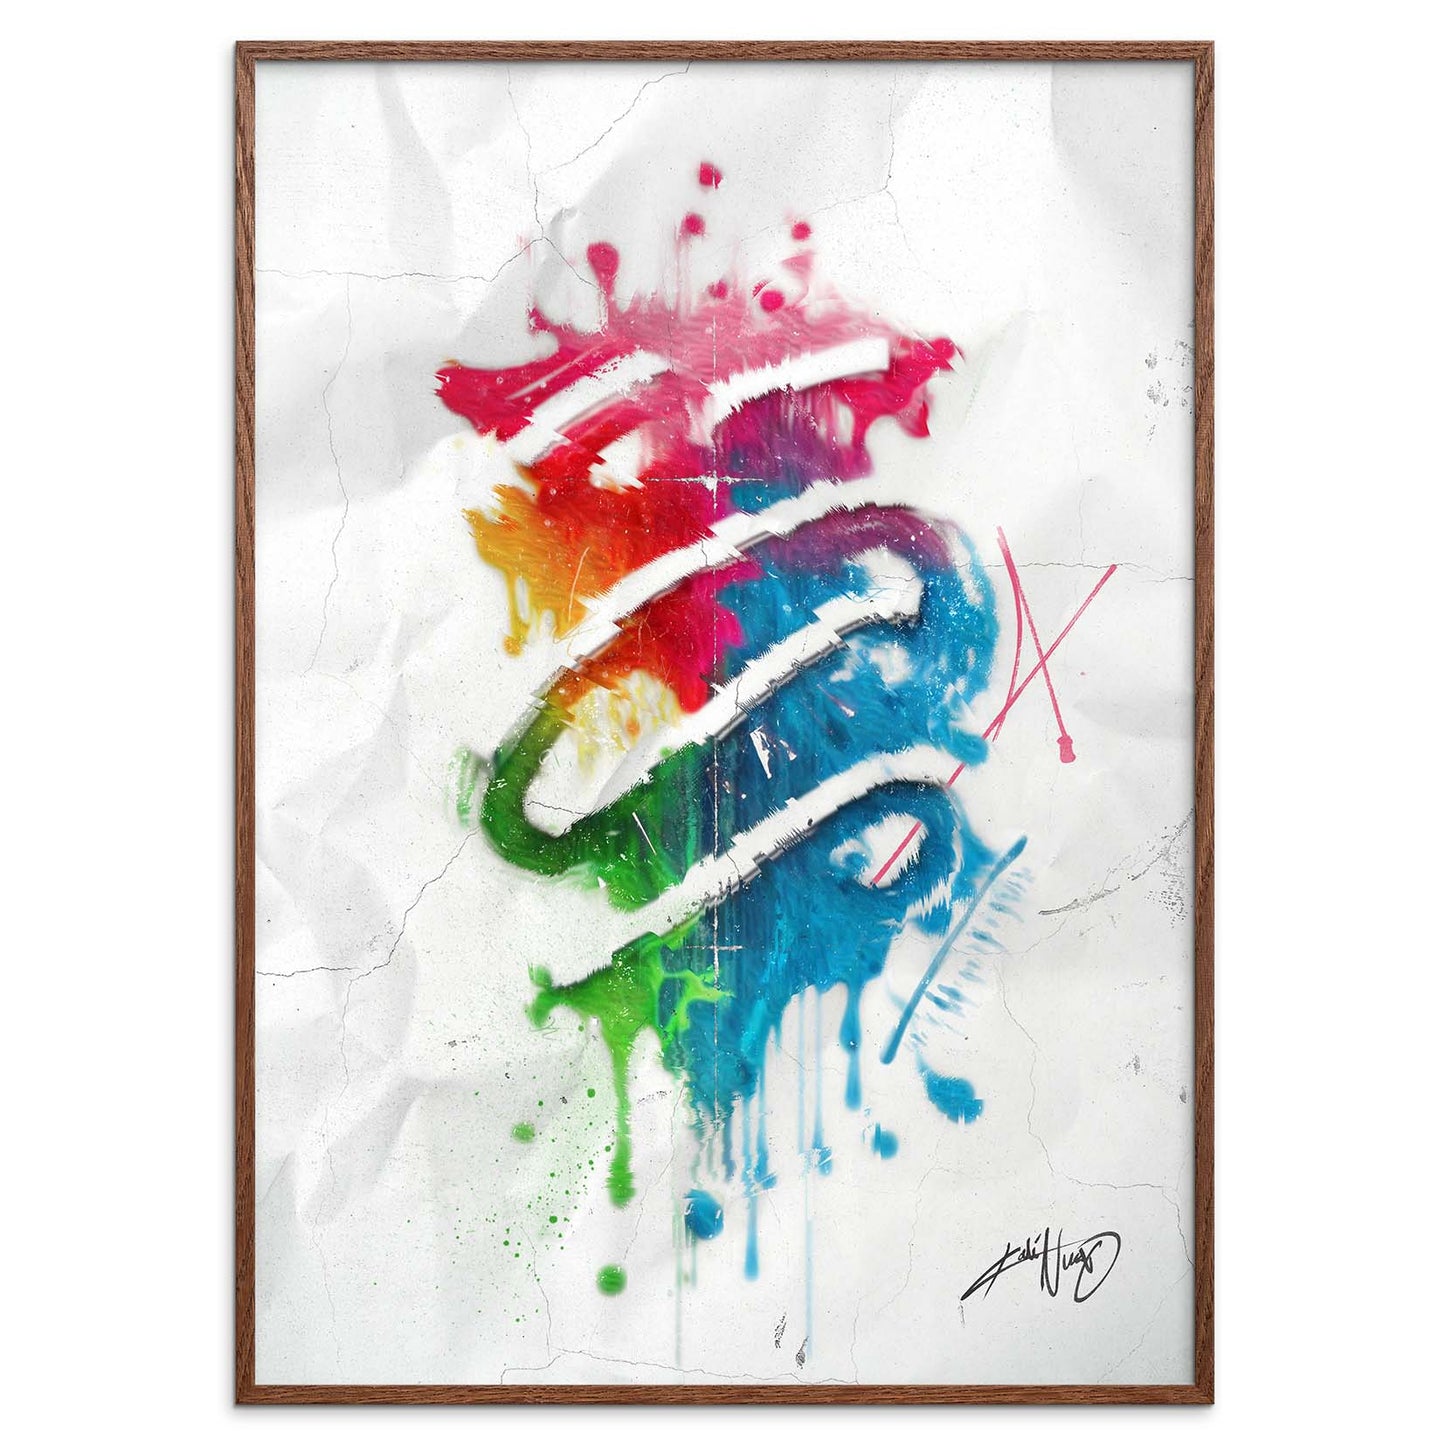 colorful abstract art poster in a smoked oak wood frame on a white background